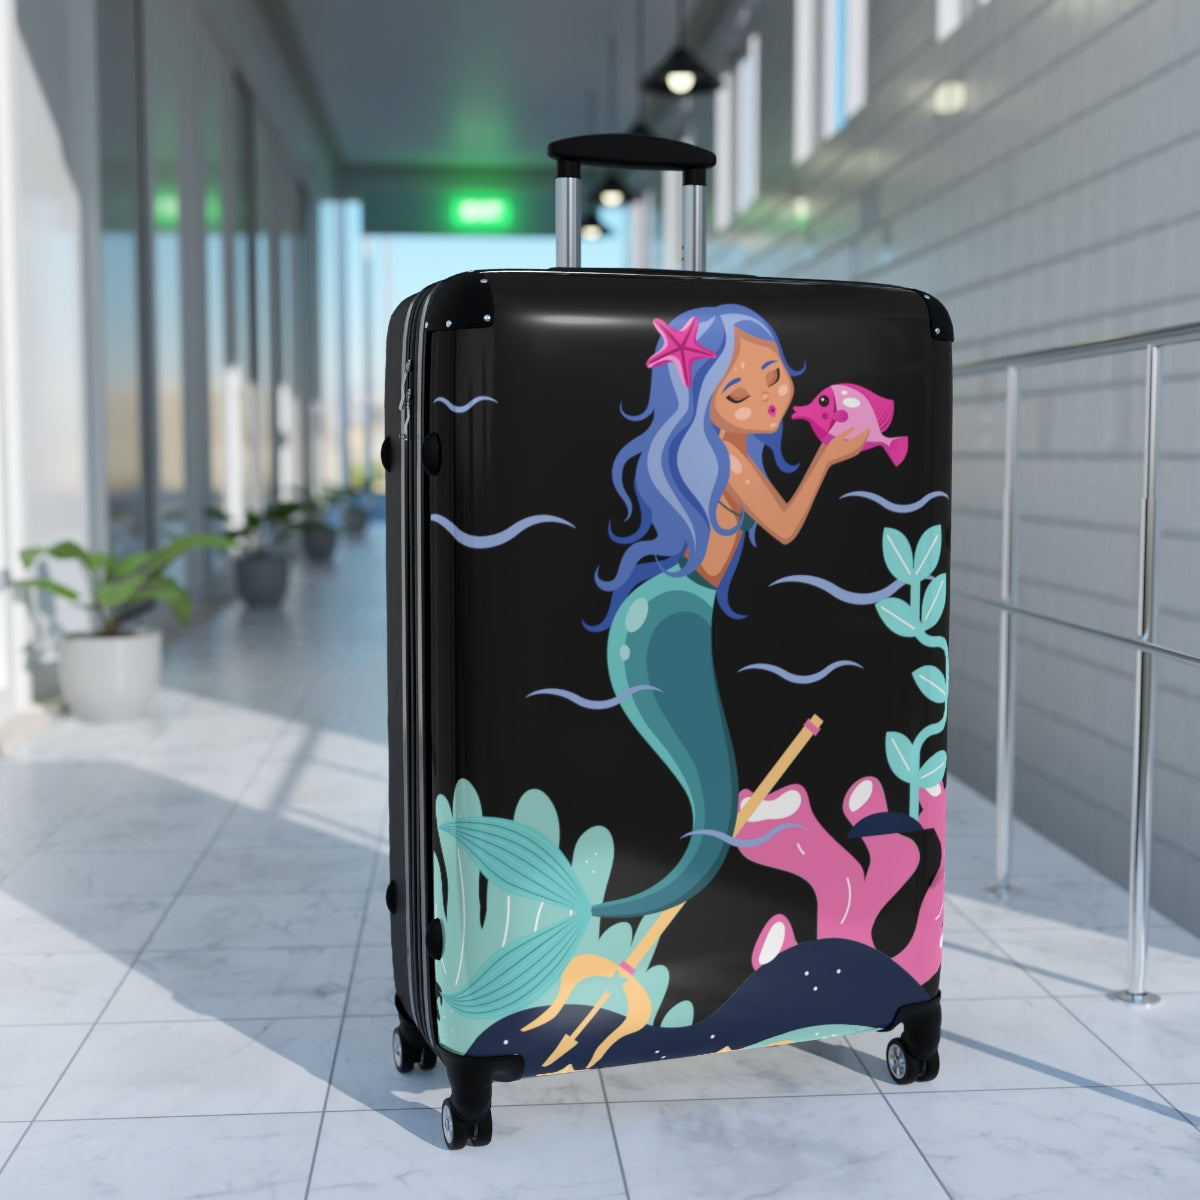 MERMAID SUITCASES LUGGAGE by Artzira, for Girls, All Sizes, Artistic Designs, Double Wheeled Spinner